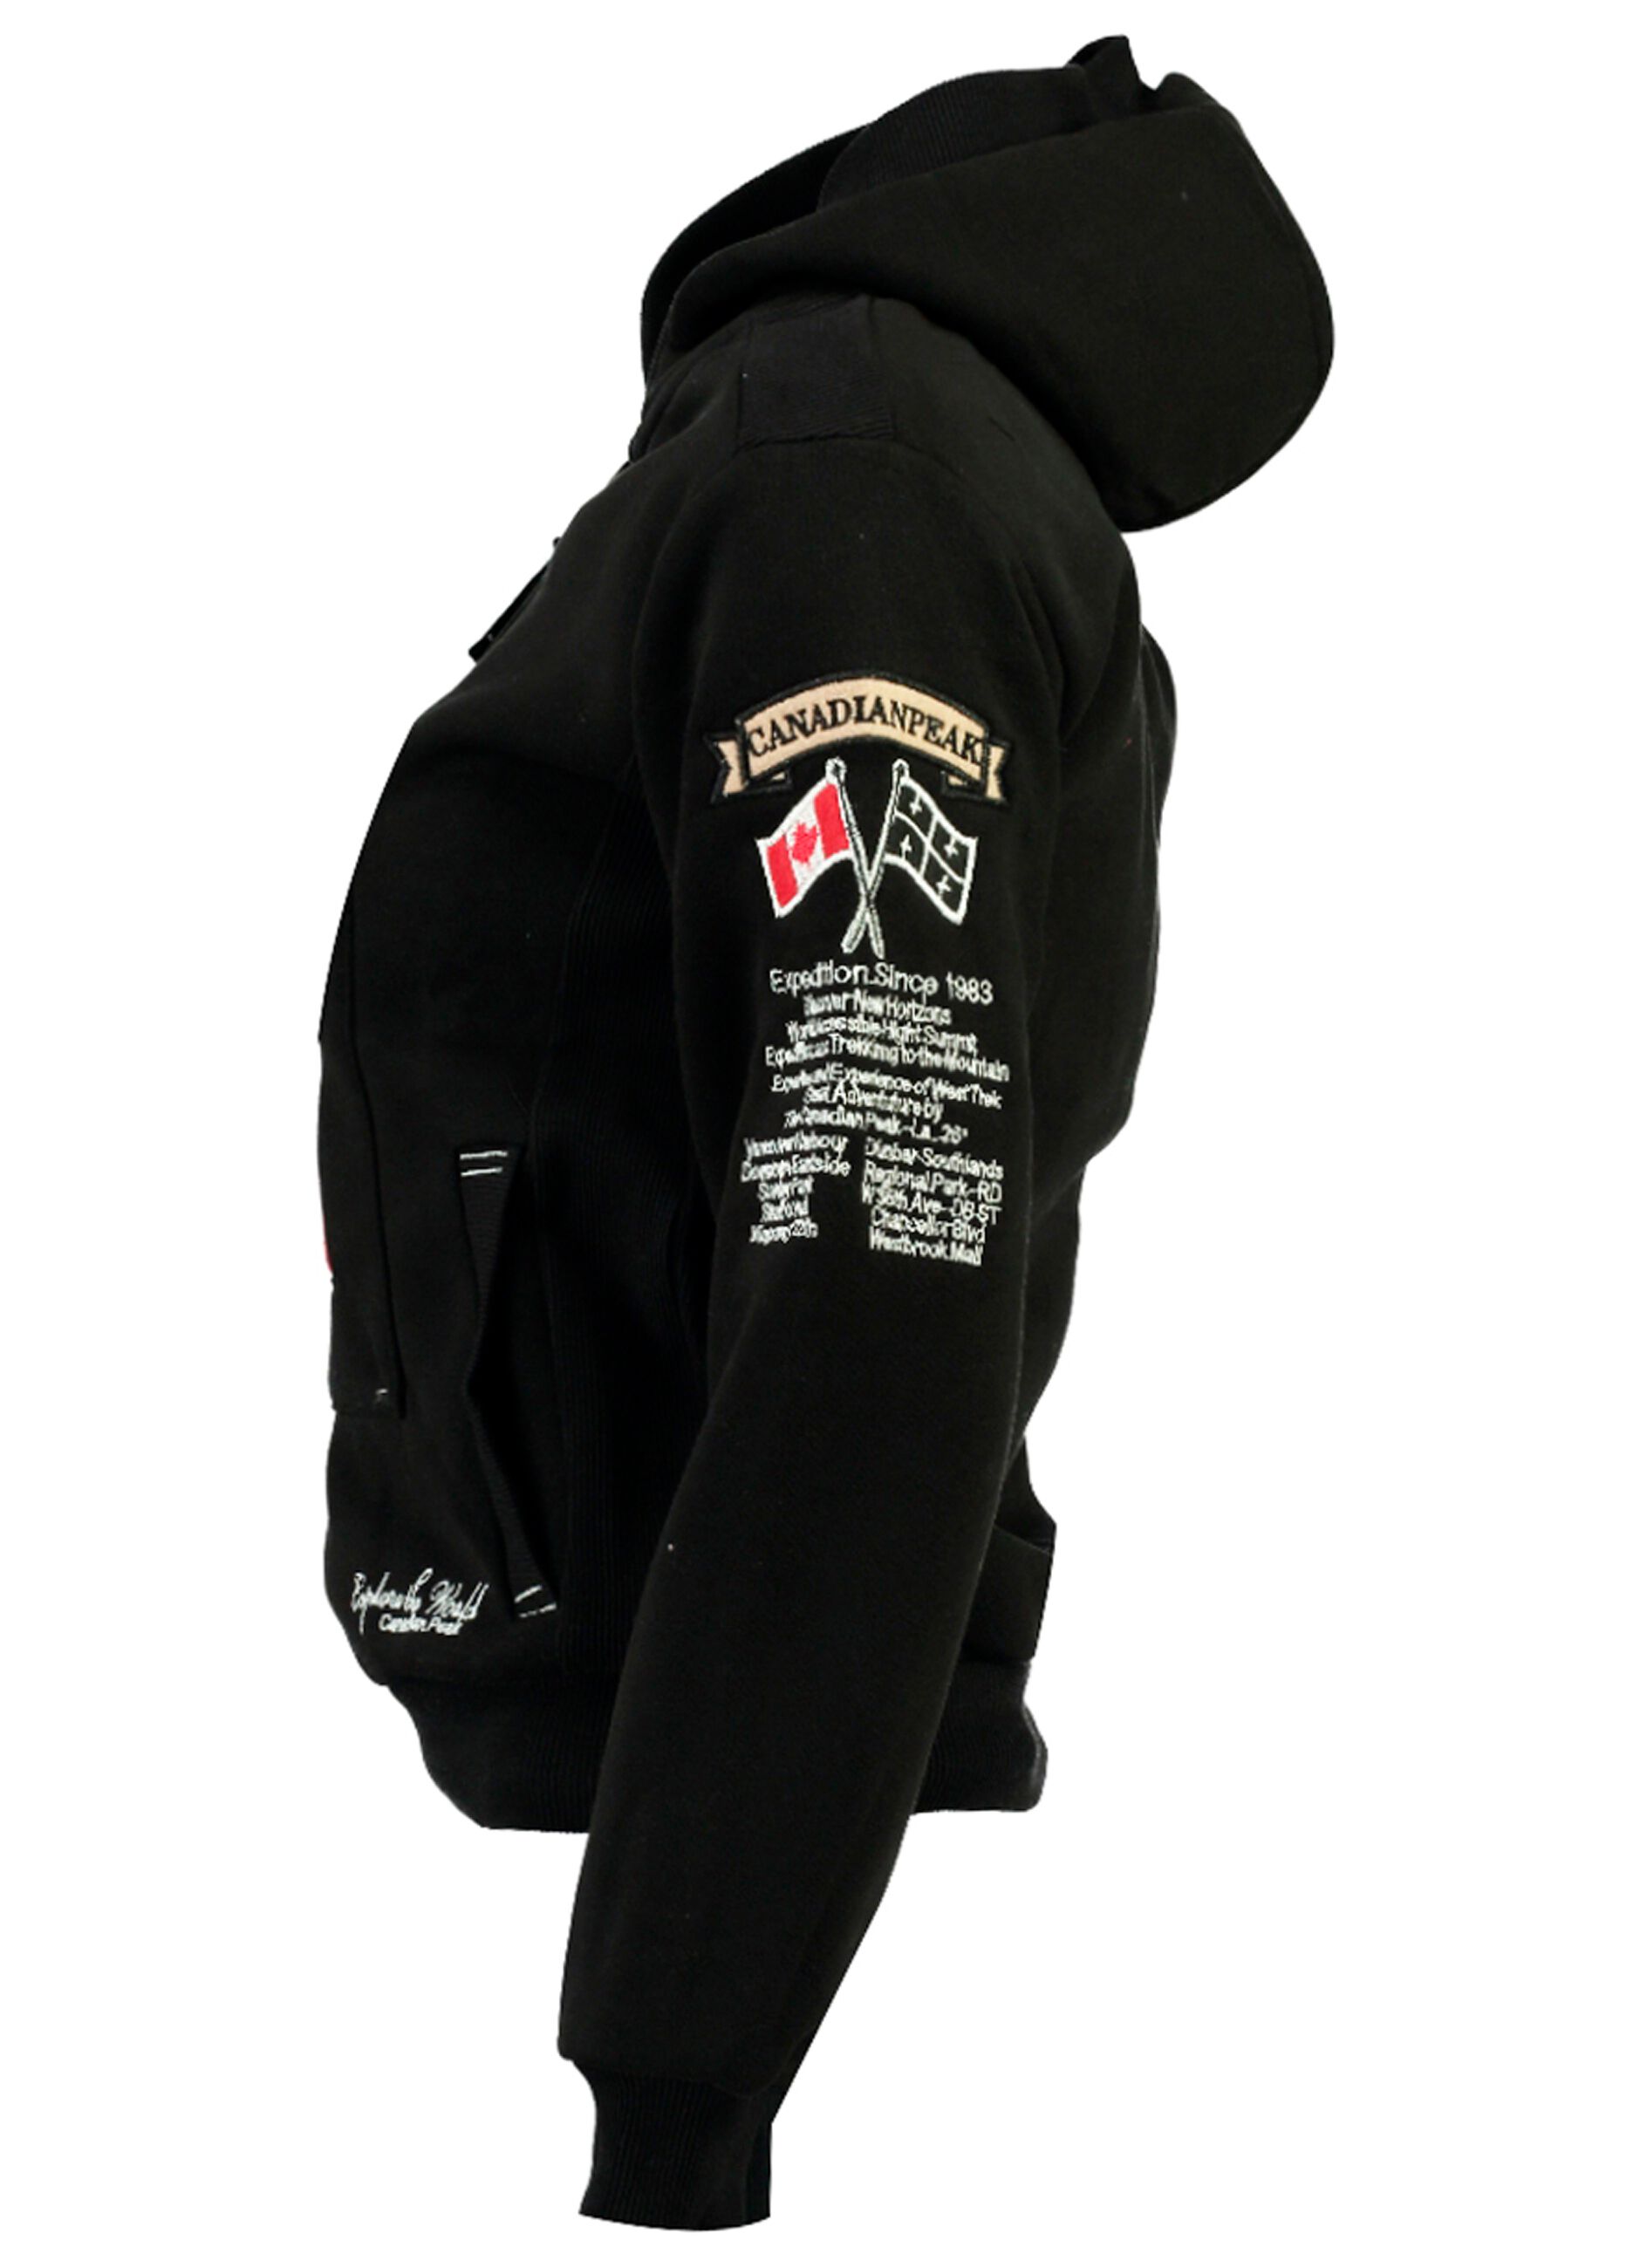 Top with hood and Canadian Peak patch